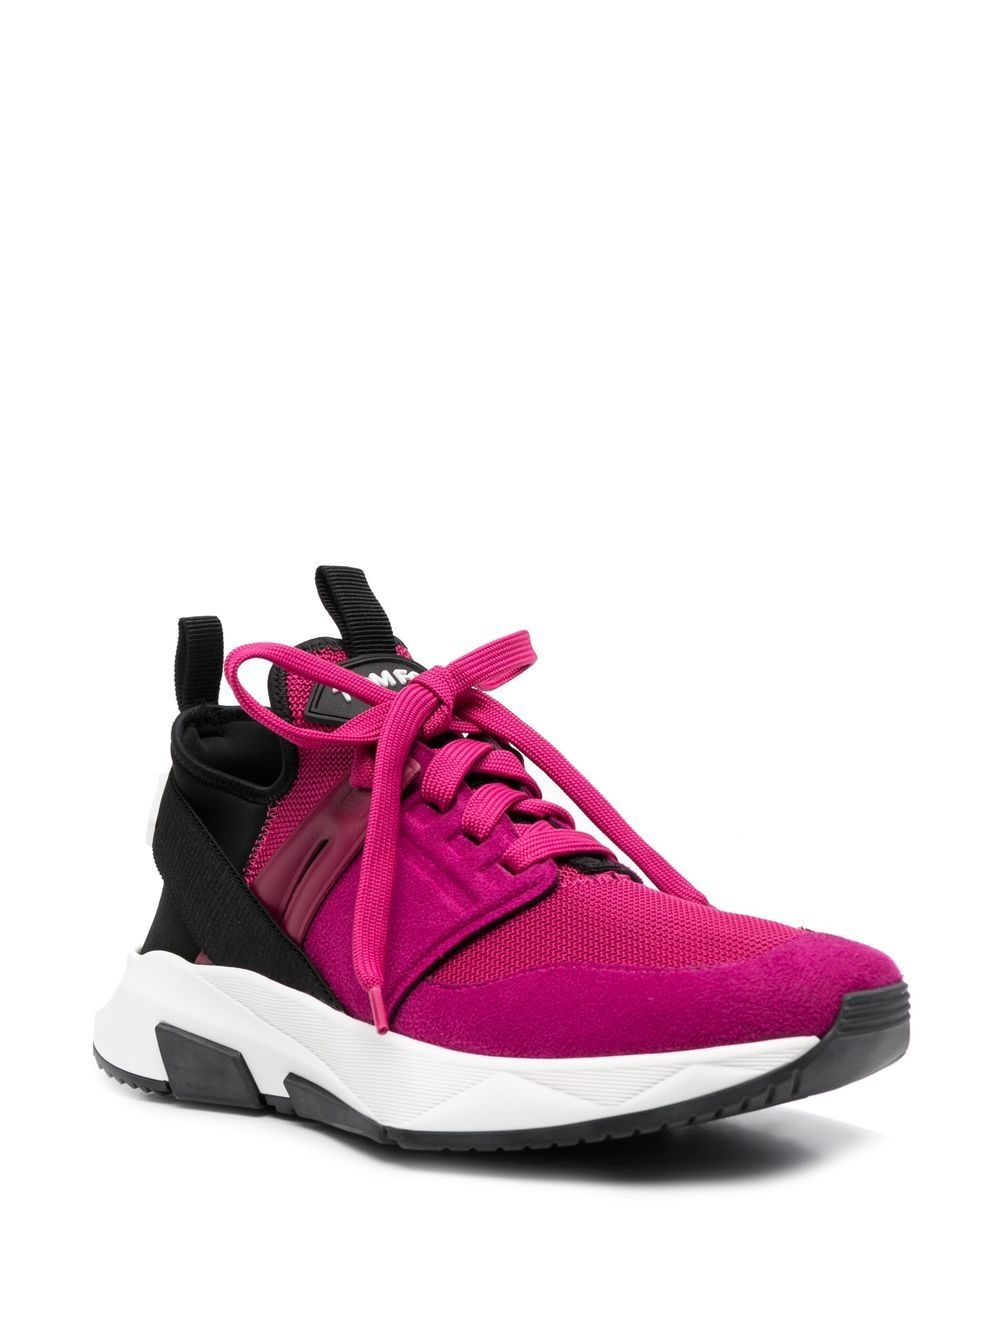 TOM FORD Jago low-top Sneakers - Farfetch